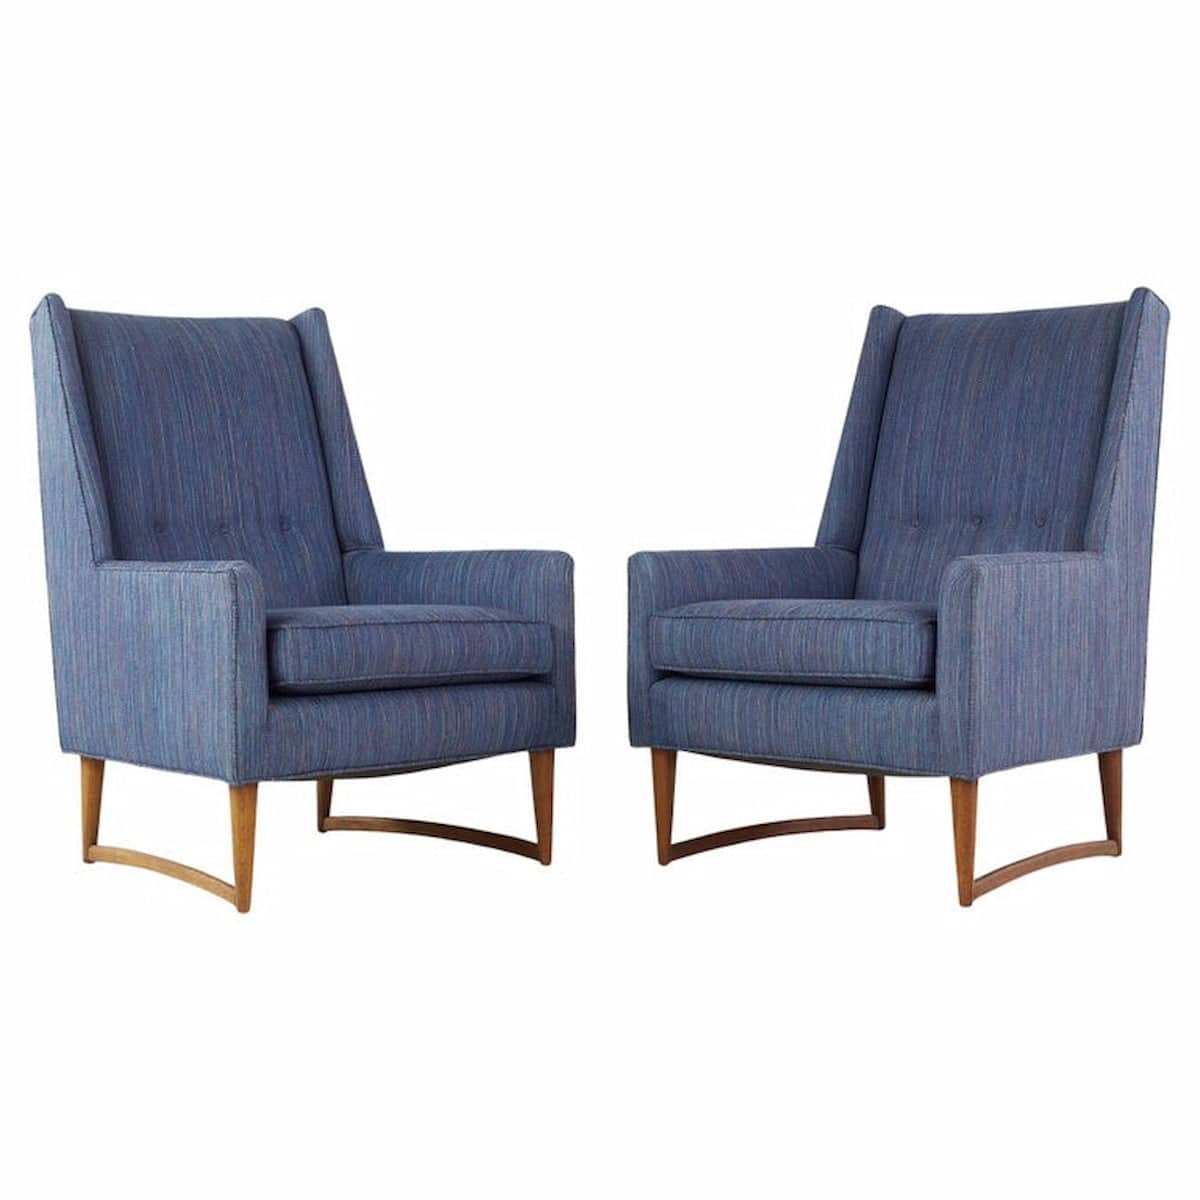 Grete Jalk Style Mid Century Sleigh Leg High Back Lounge Chairs - Pair